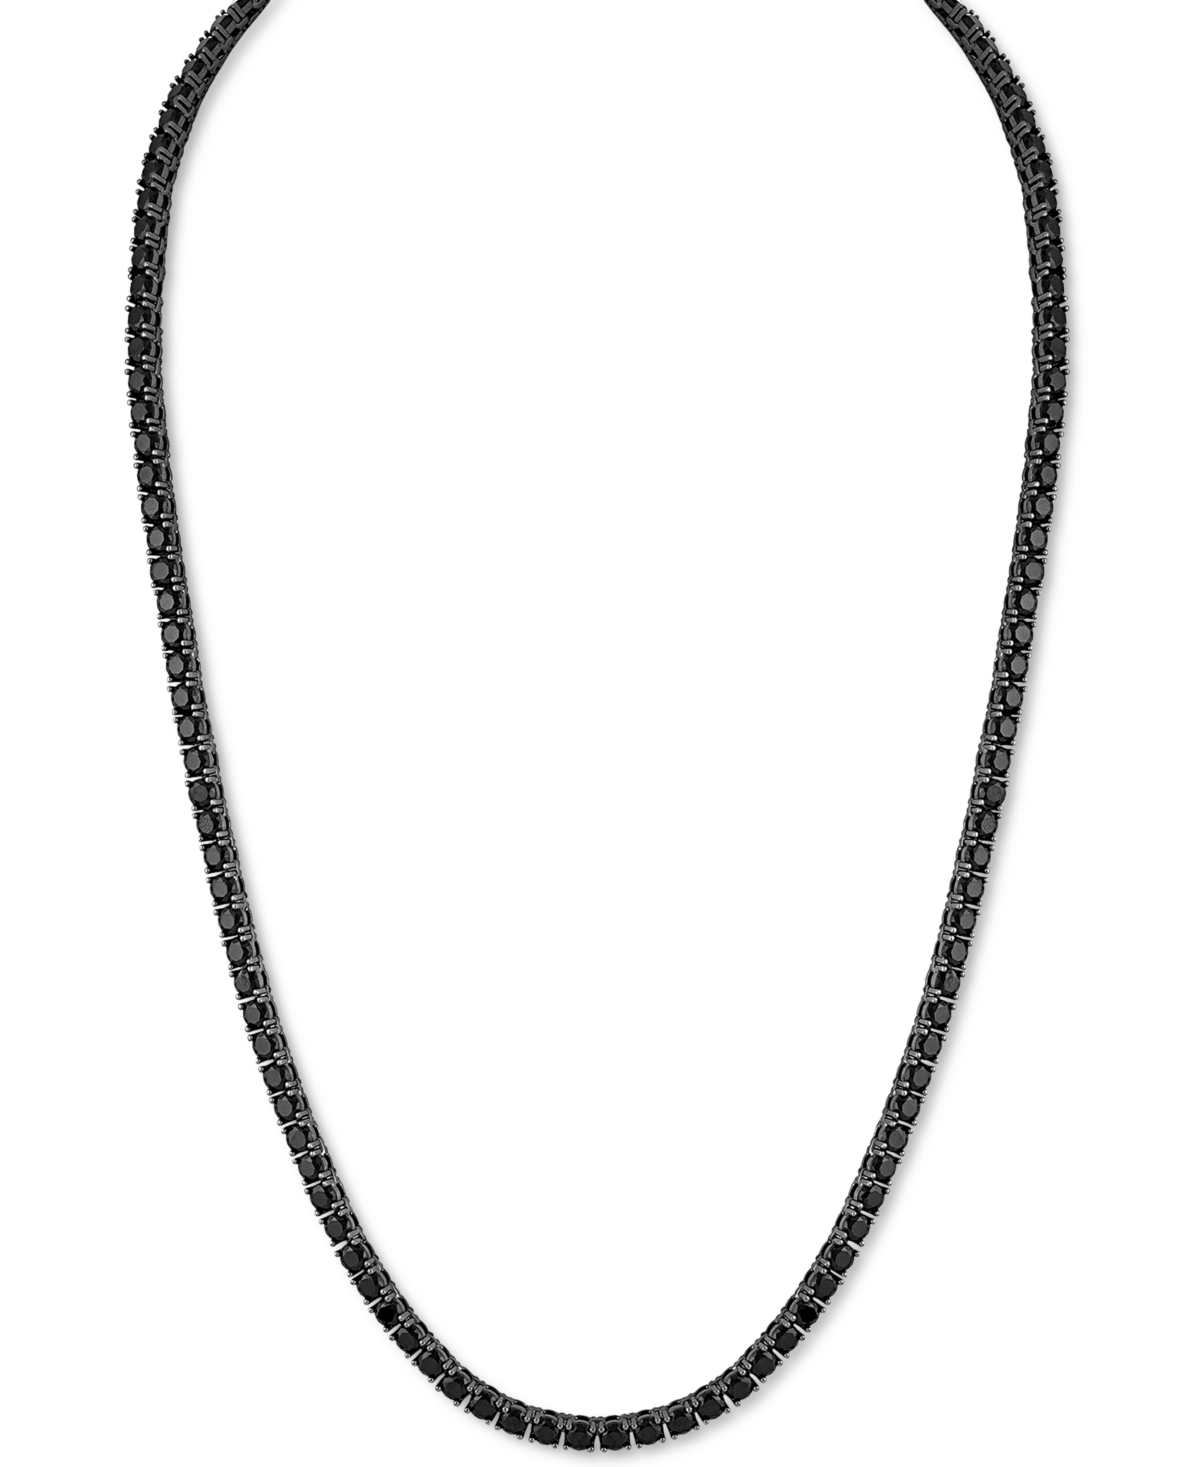 Esquire Men's Jewelry Cubic Zirconia (4mm) Tennis Necklace 22" (Also in Black Spinel), Created for Macy's